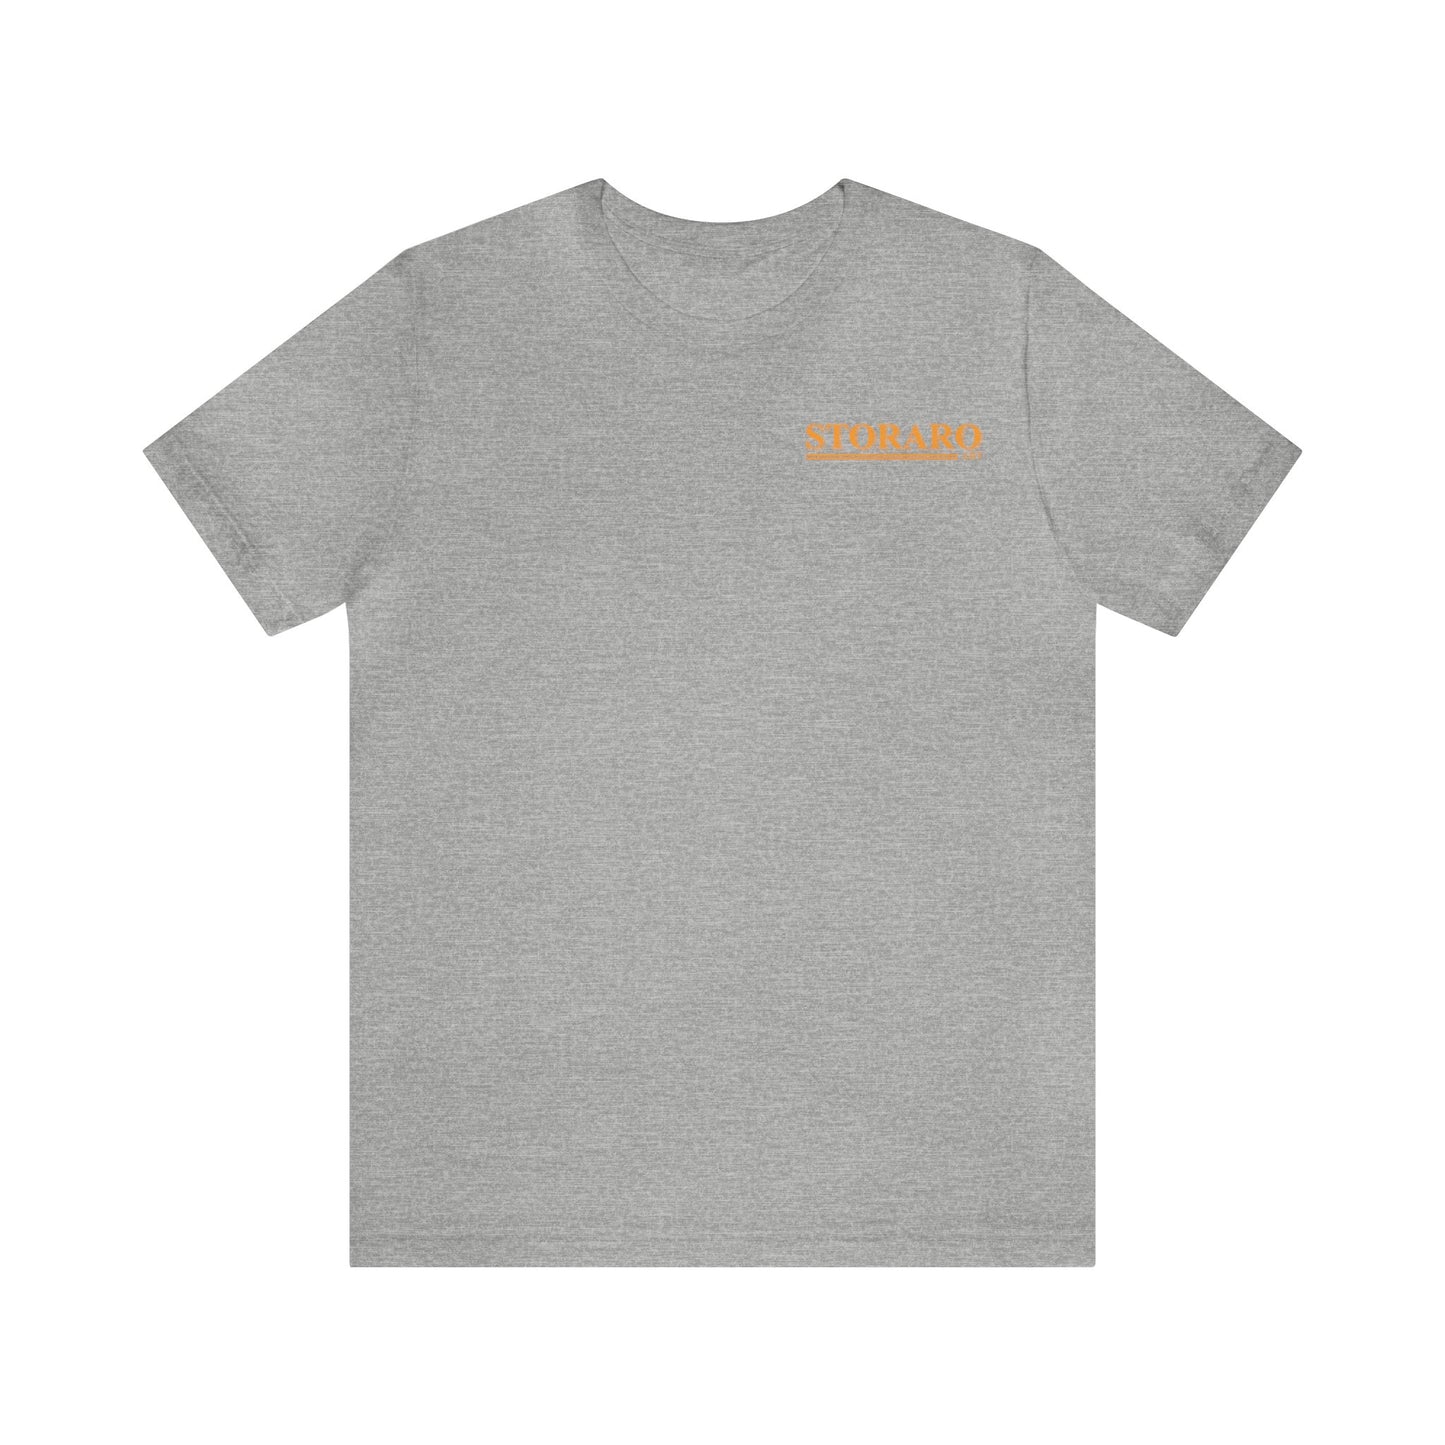 The Celsius Library Tee Shirt